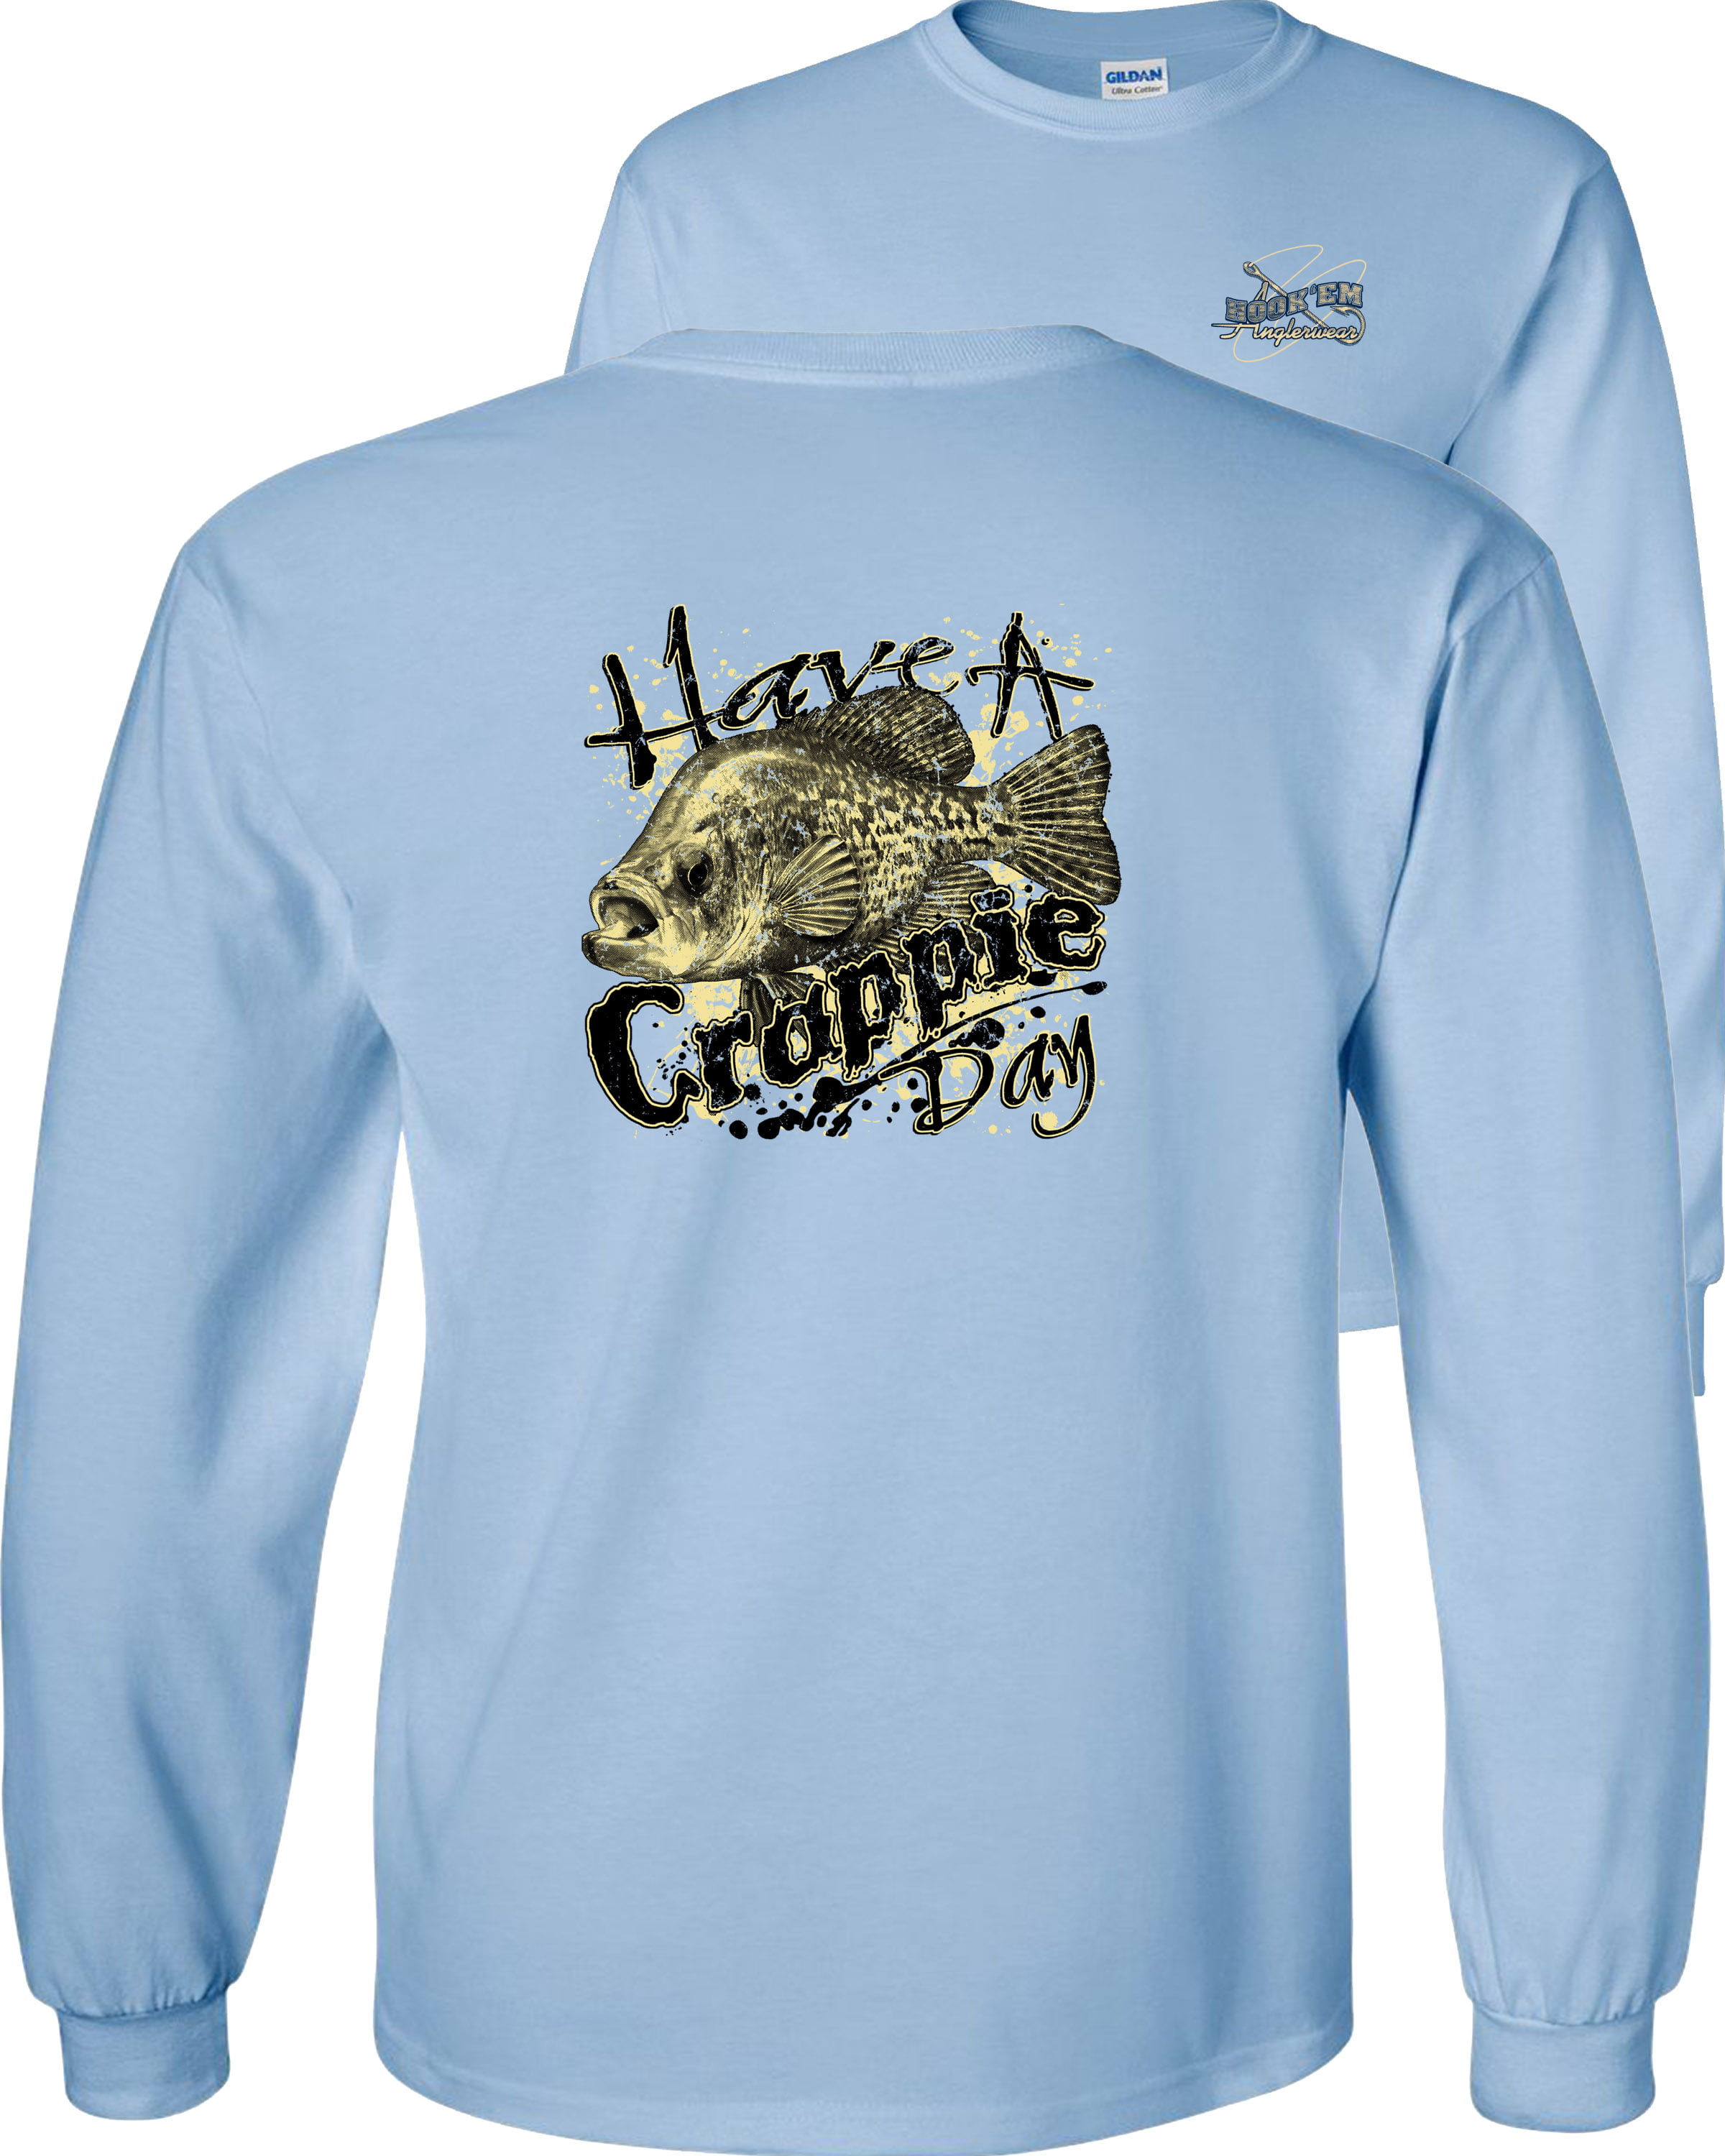 Fair Game Have a Crappie Day Long Sleeve Shirt, Fishing Graphic  Tee-Ash-Small